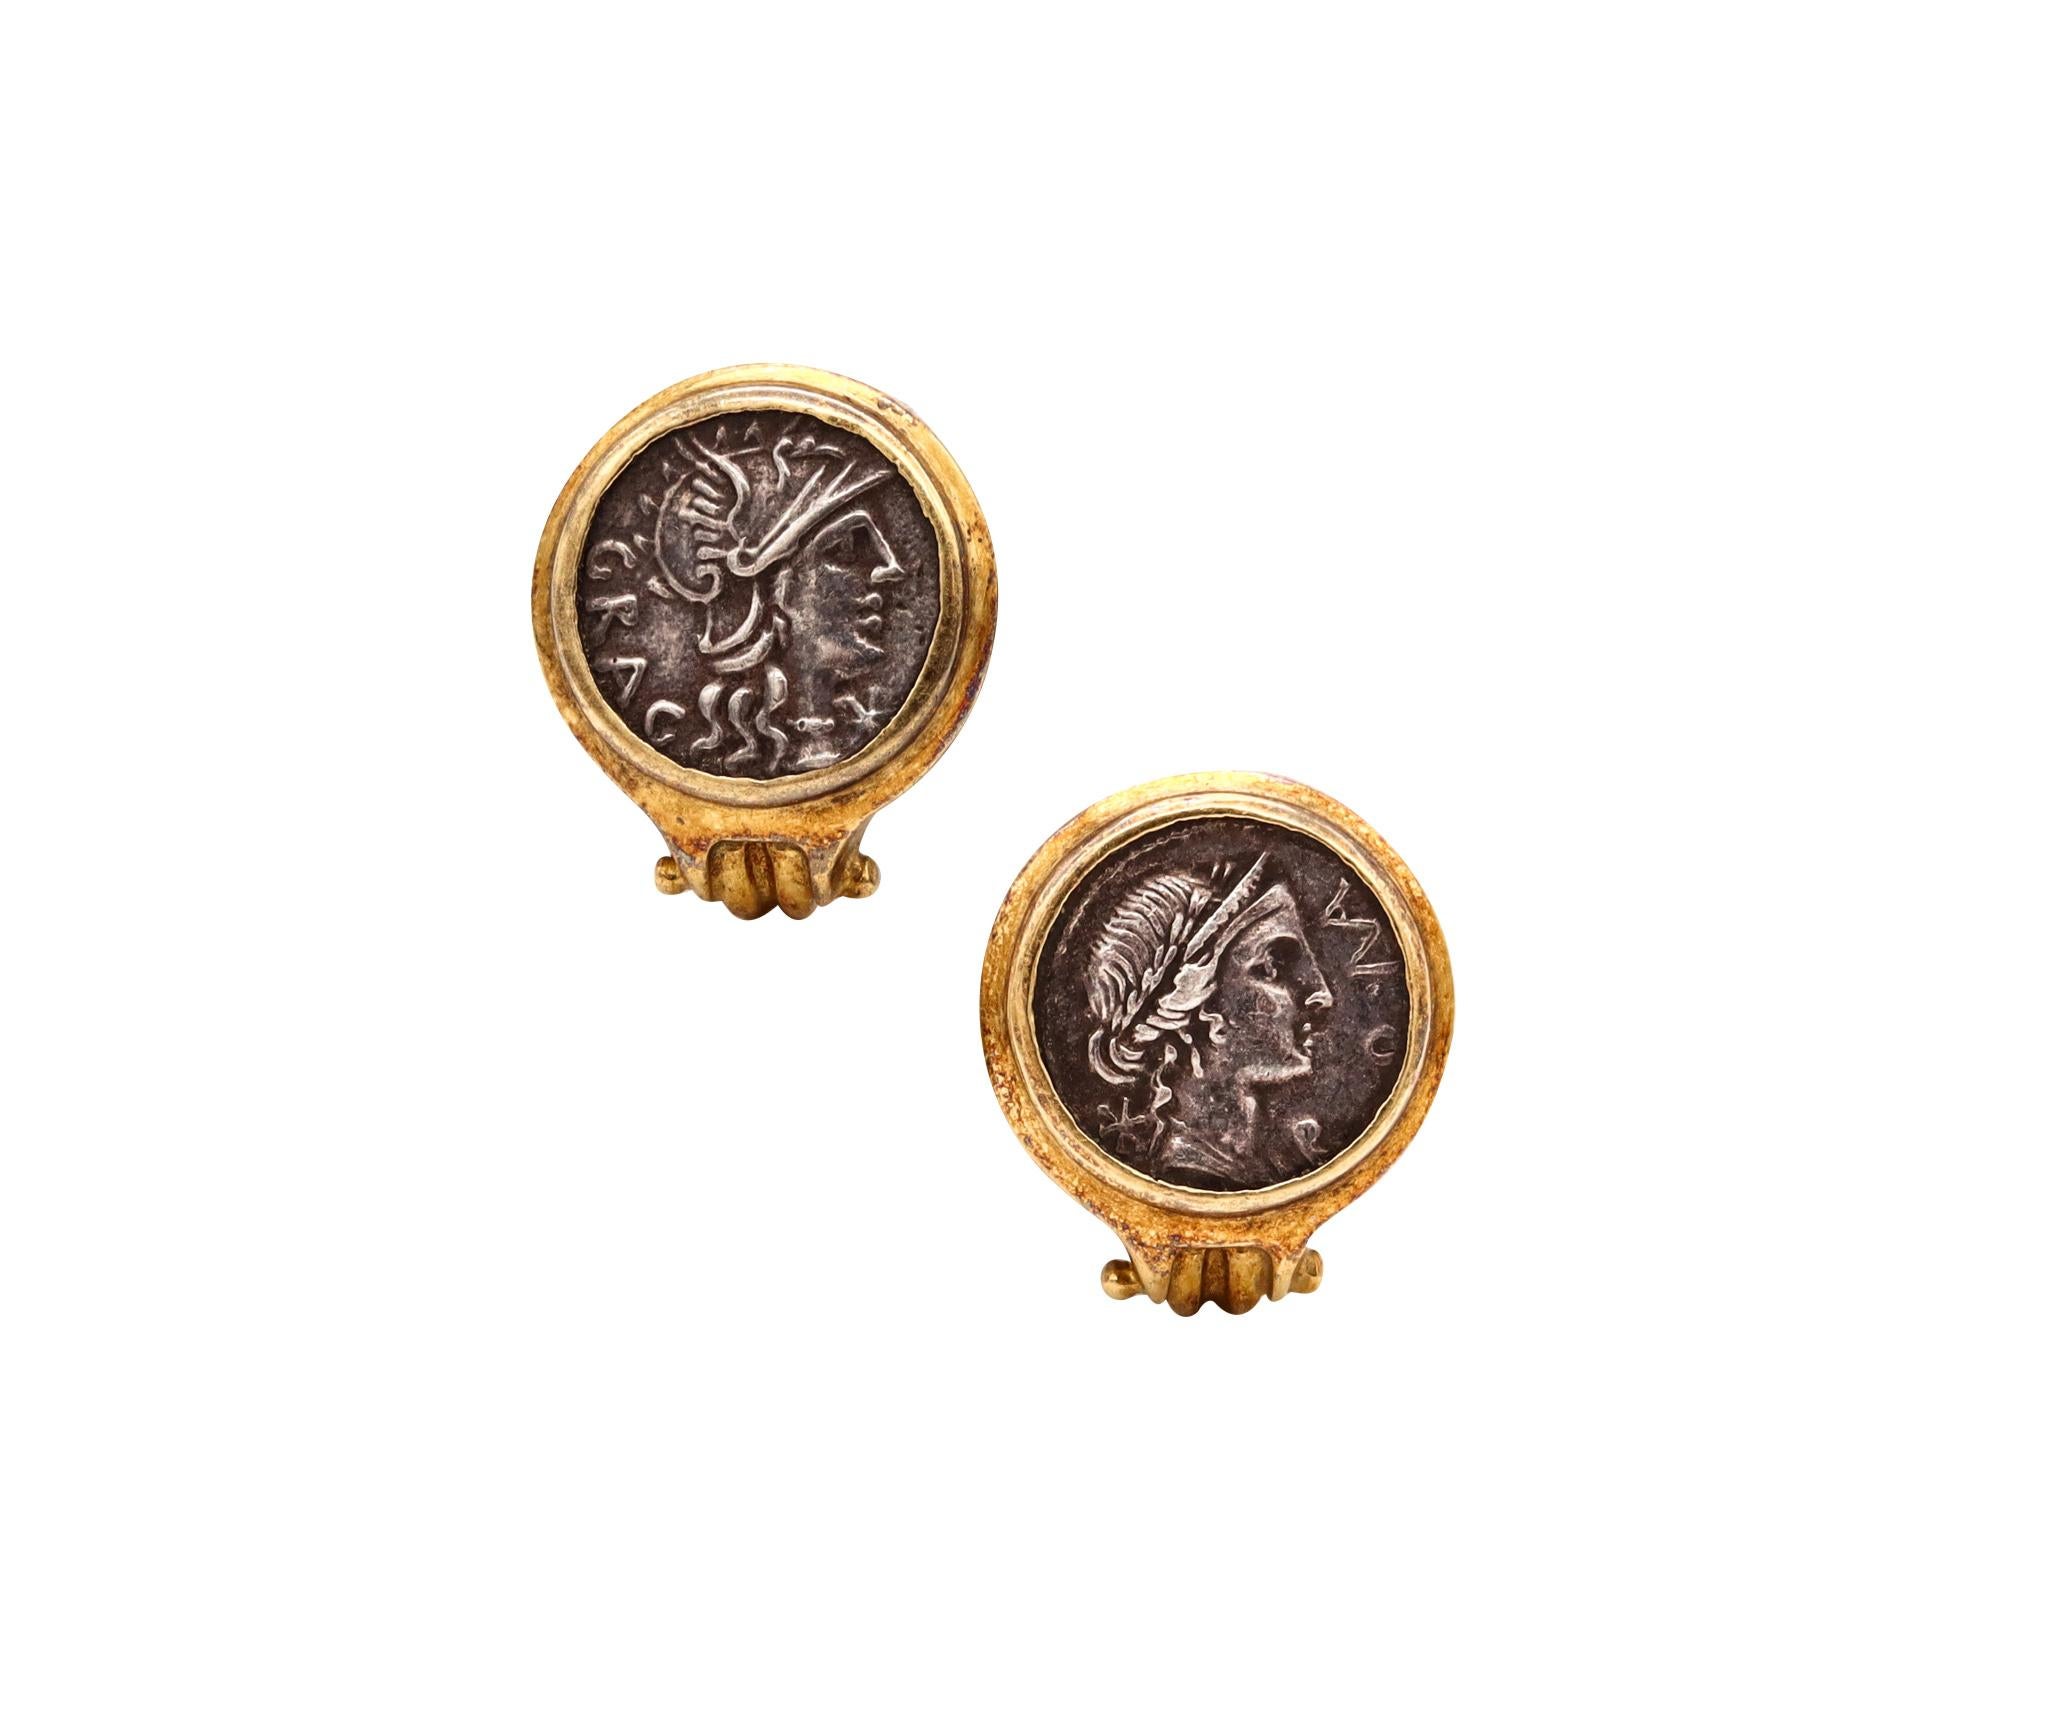 Ancient Roman Coin Earrings in 18kt Yellow Gold with 136-114 BC Silver Denarius 2